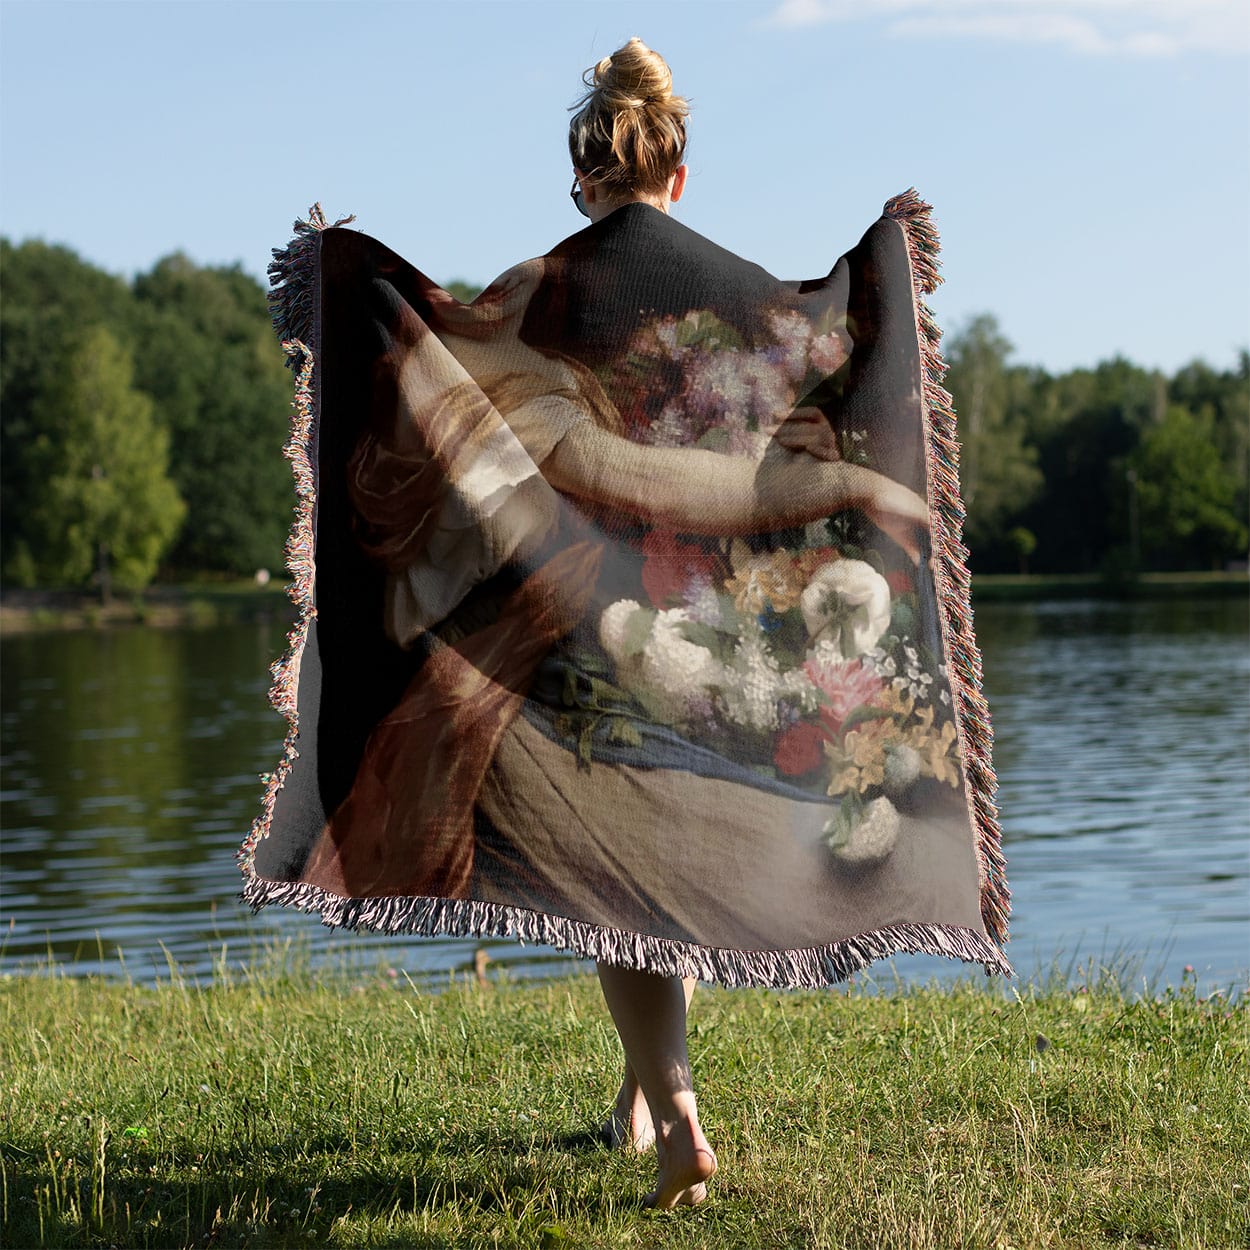 Young Maiden Woven Blanket Held on a Woman's Back Outside